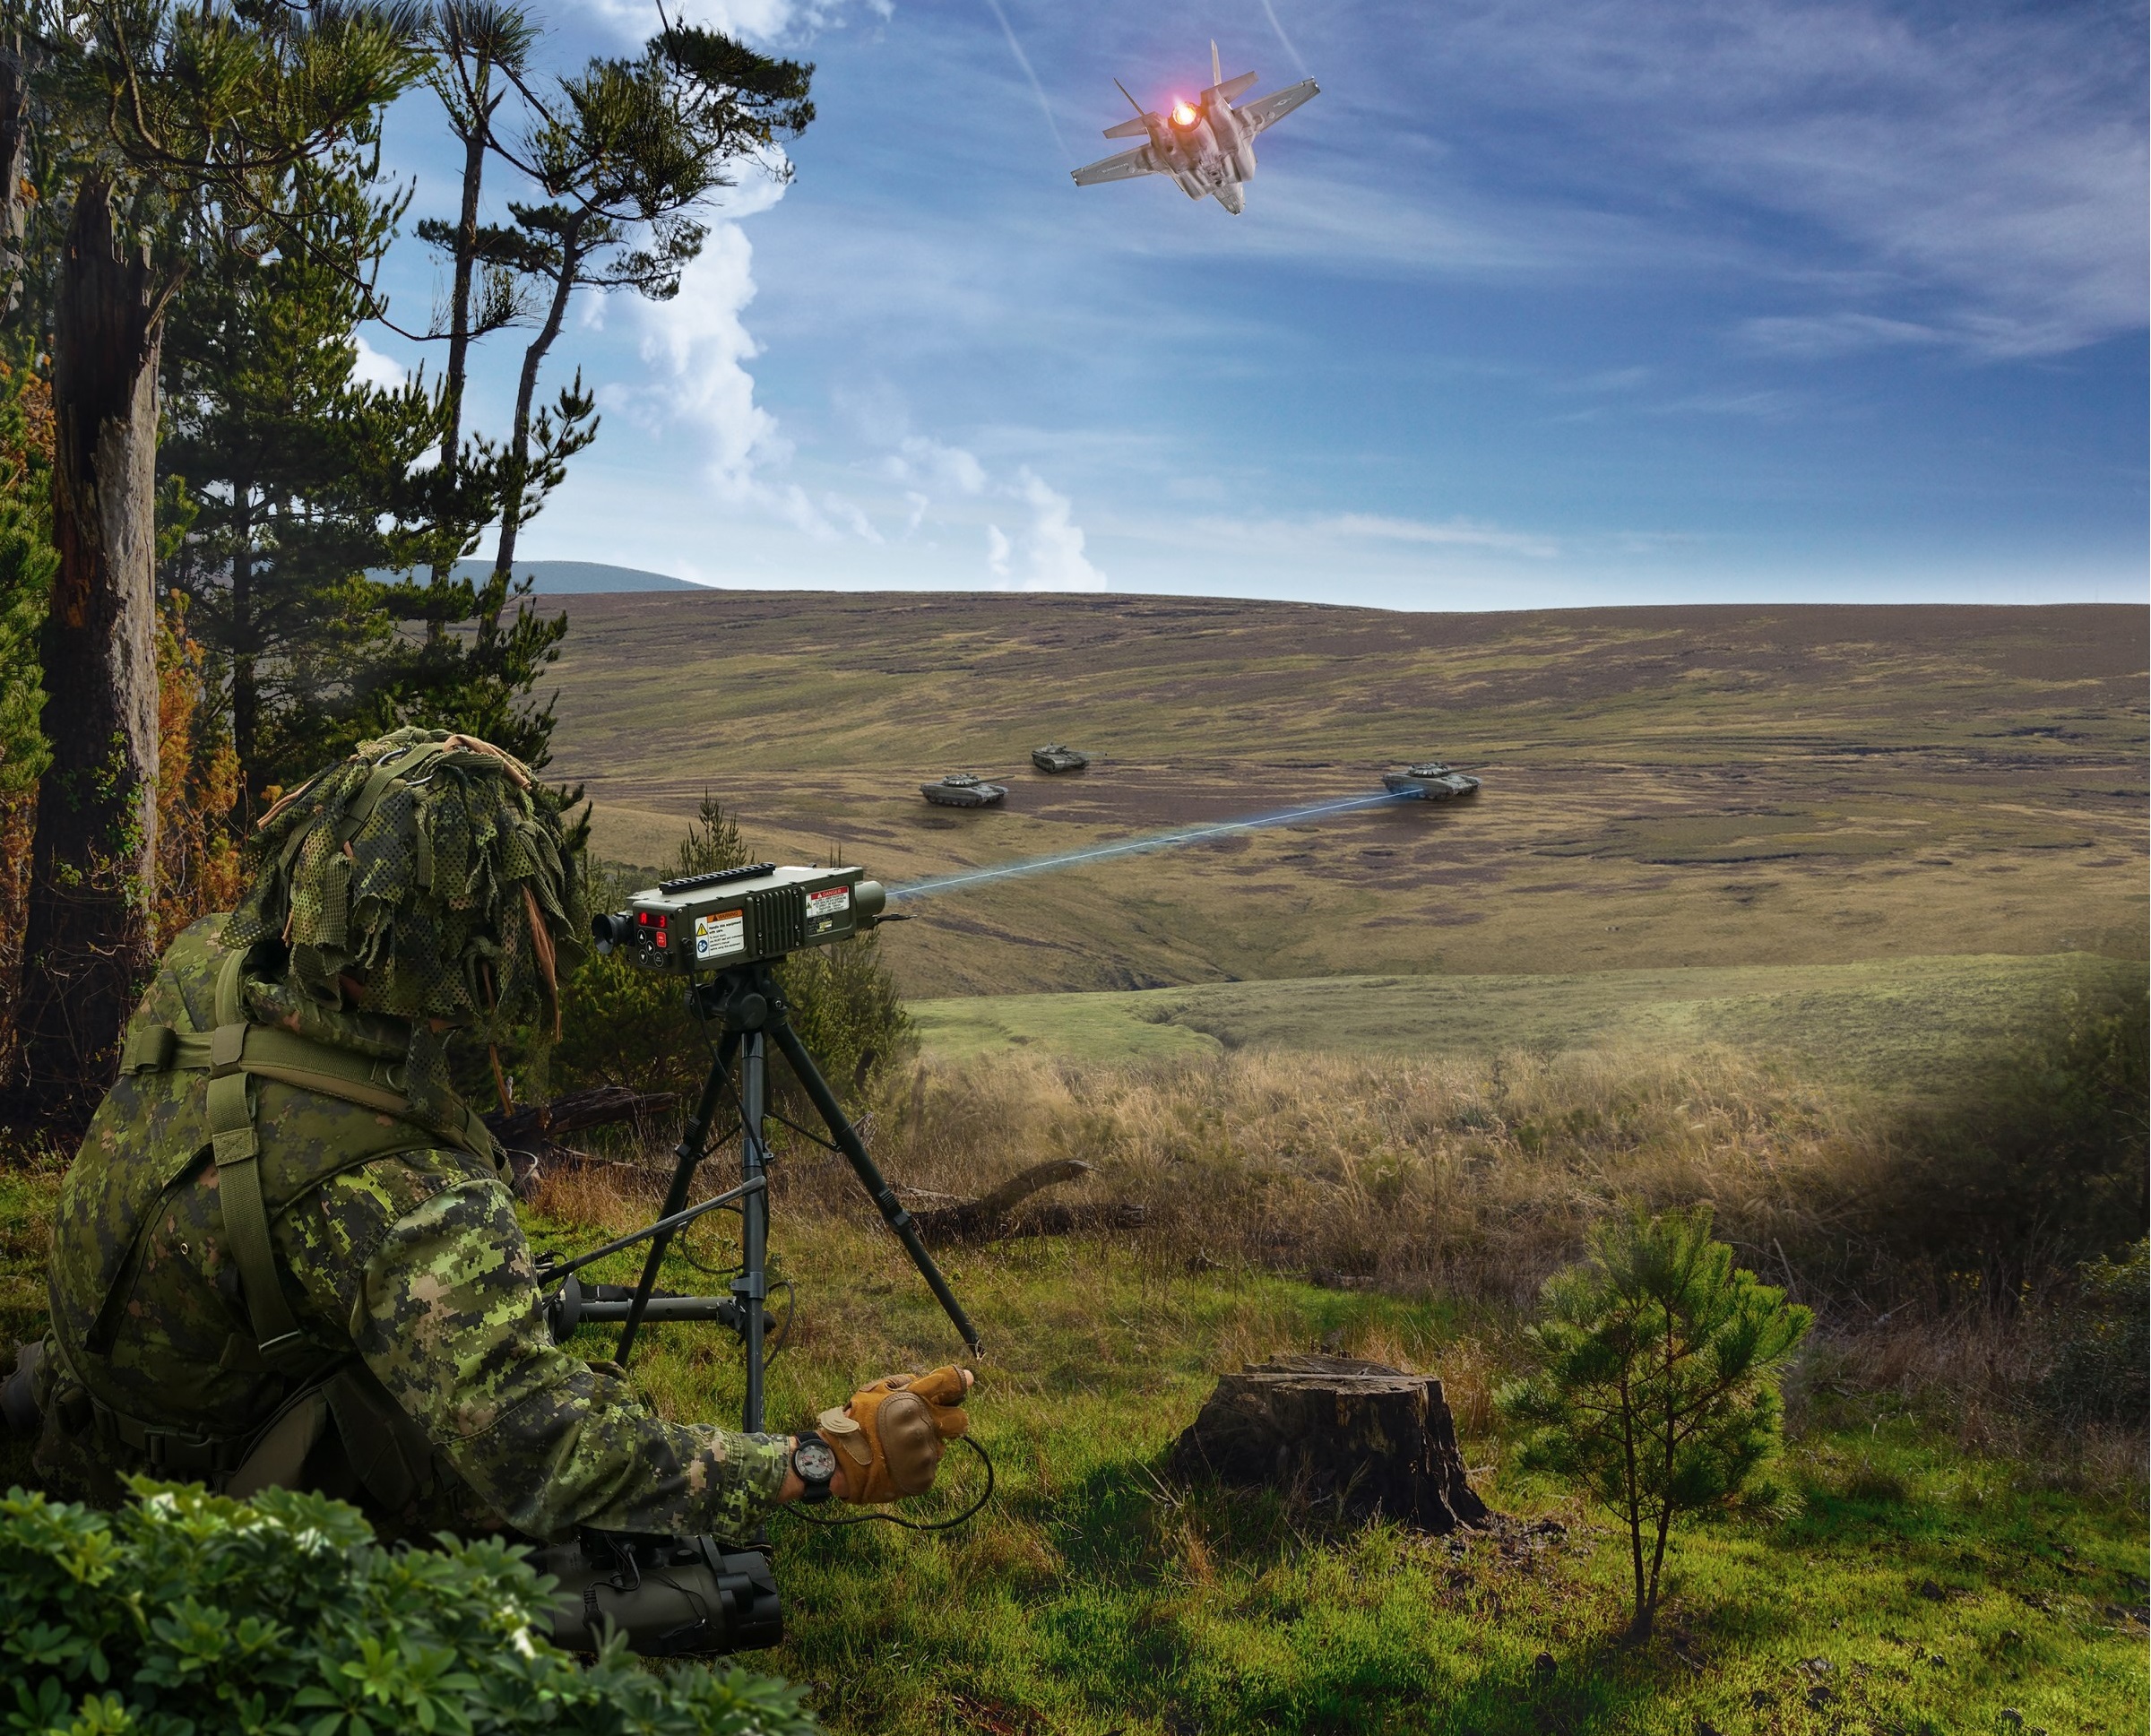 Leonardo Awarded Contract to Supply Slovenian Armed Forces with Type 163 Laser Target Designator